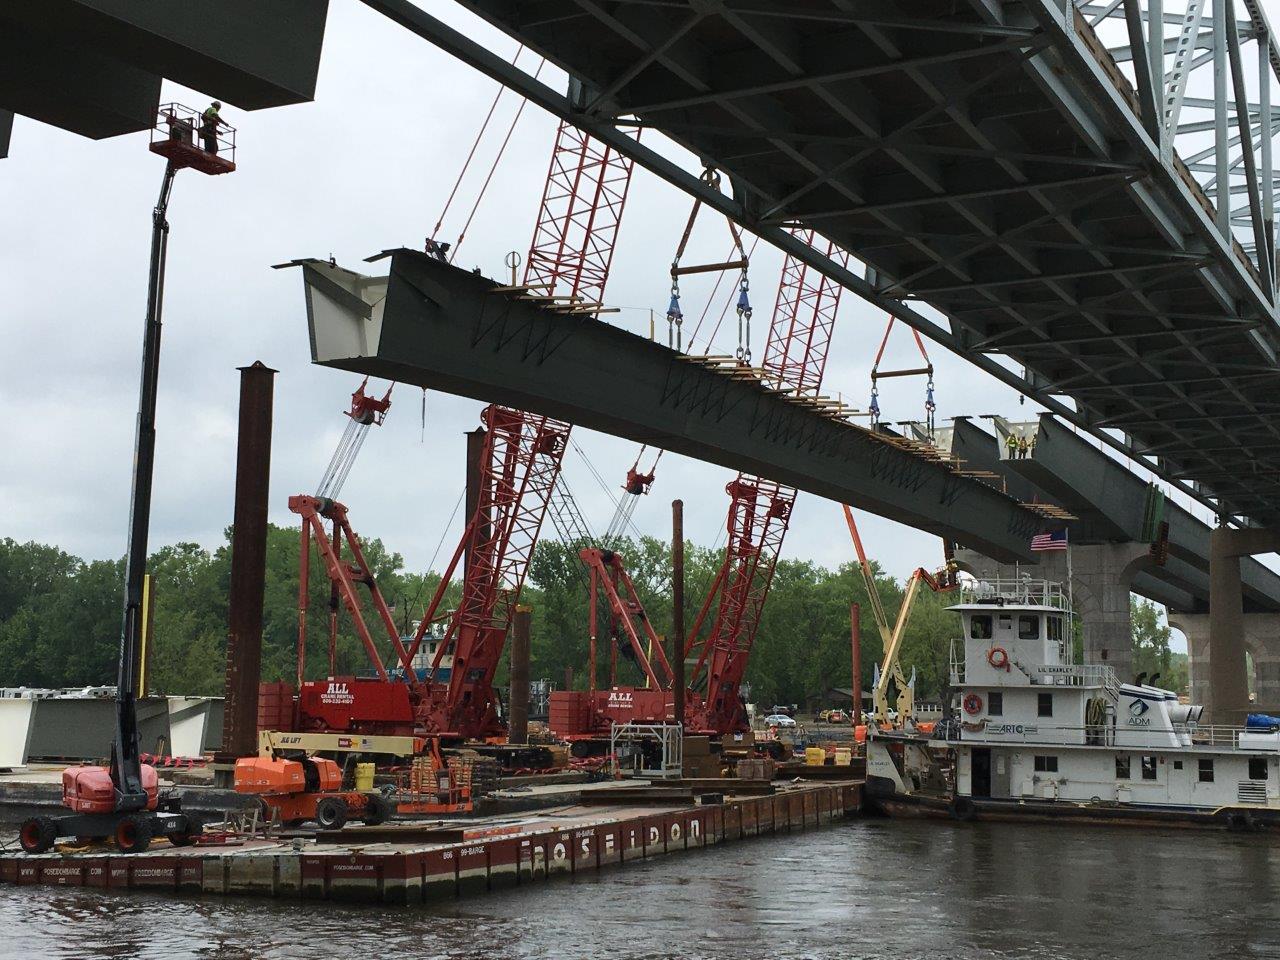 A river barge with cranes on it, lifting the bottom piece of a bridge into place.